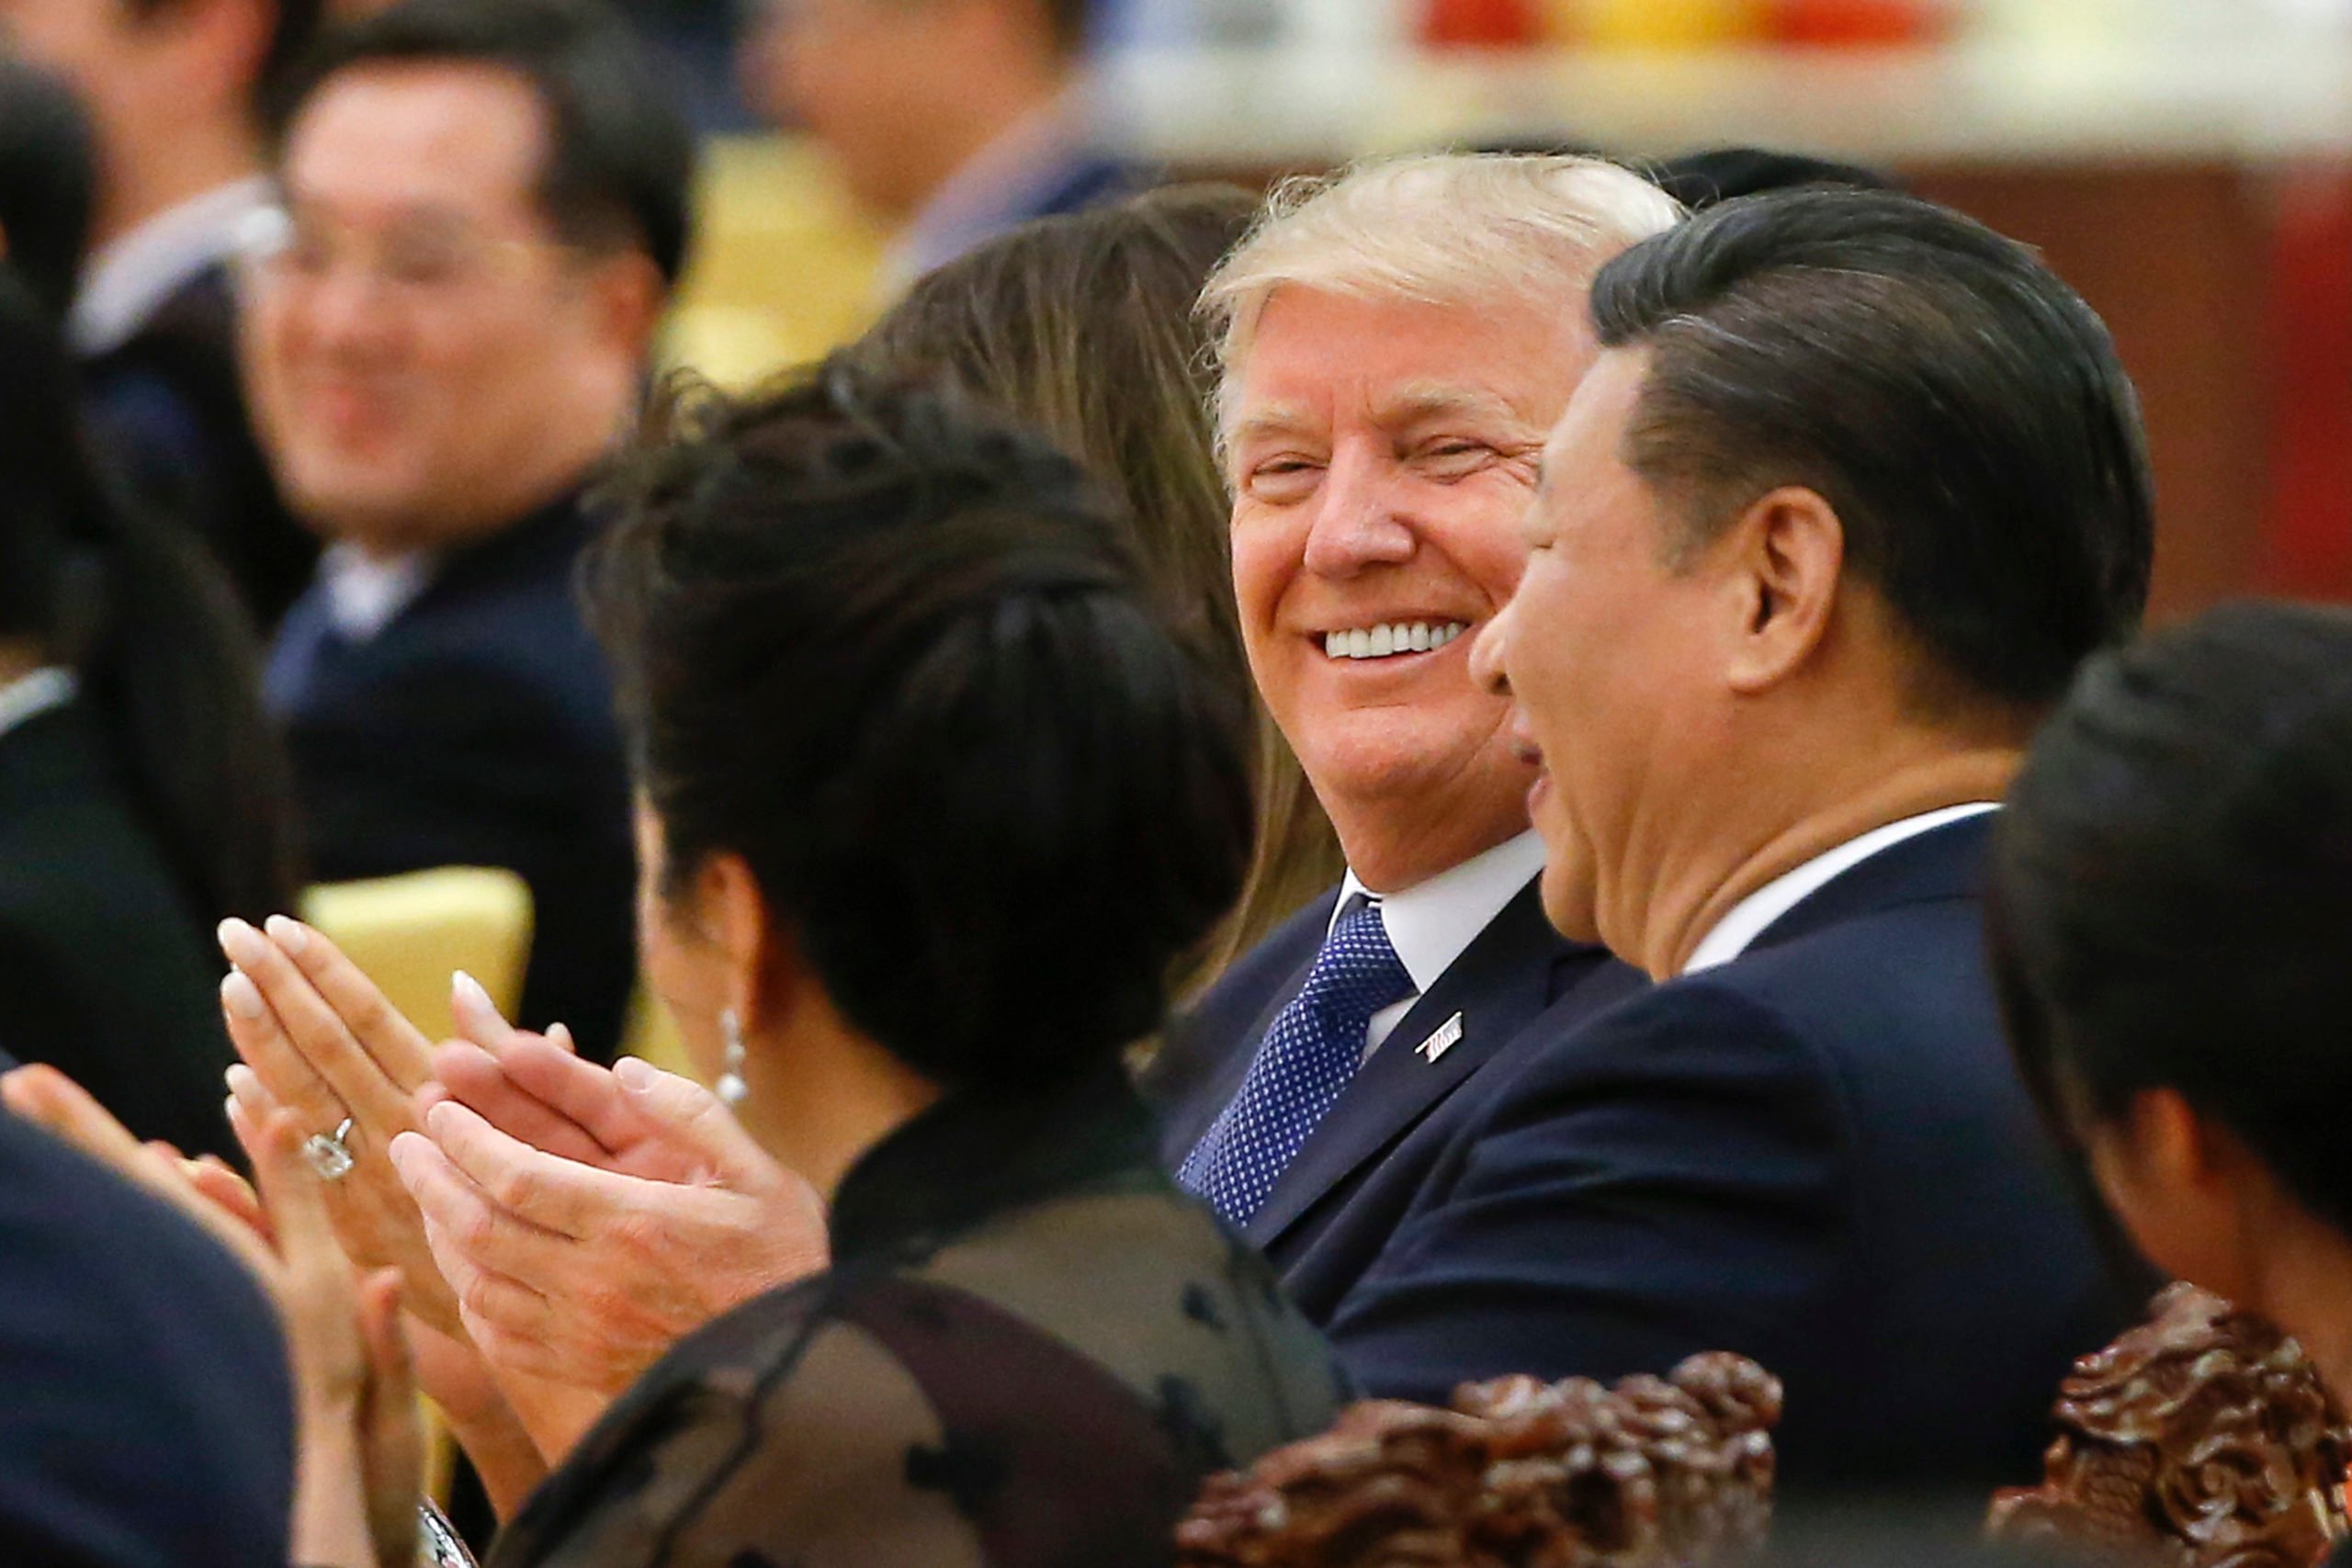 BEIJING, CHINA - NOVEMBER 9: U.S. President Donald Trump and China's President Xi Jinping attend at a state dinner at the Great Hall of the People on November 9, 2017 in Beijing, China. Trump is on a 10-day trip to Asia. (Photo by Thomas Peter - Pool/Getty Images)